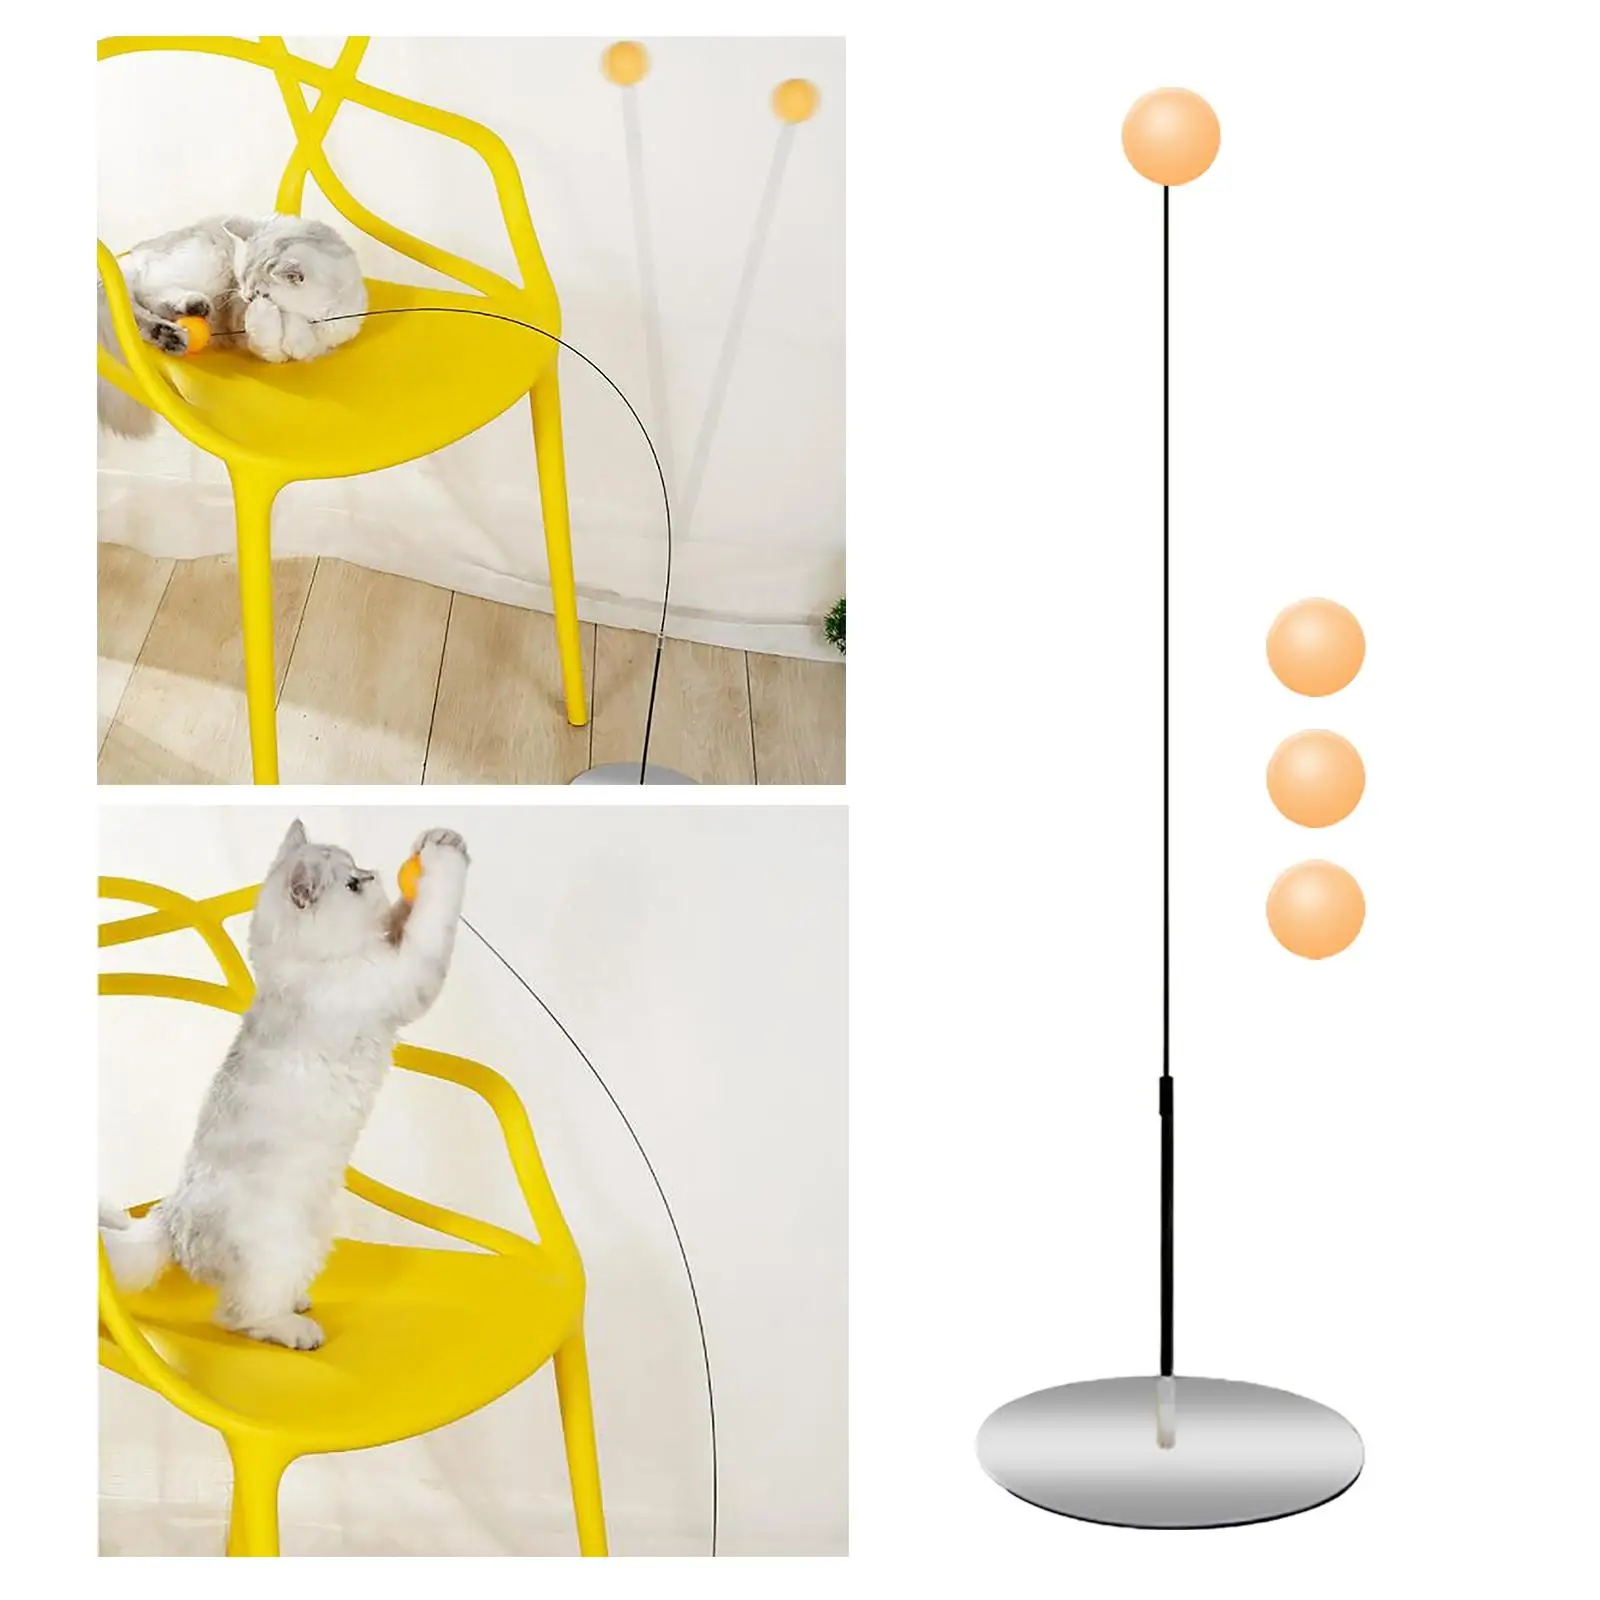 Cat Stick Toy with Elastic Alloy Rod IQ Improving 4 Balls for Training Tool